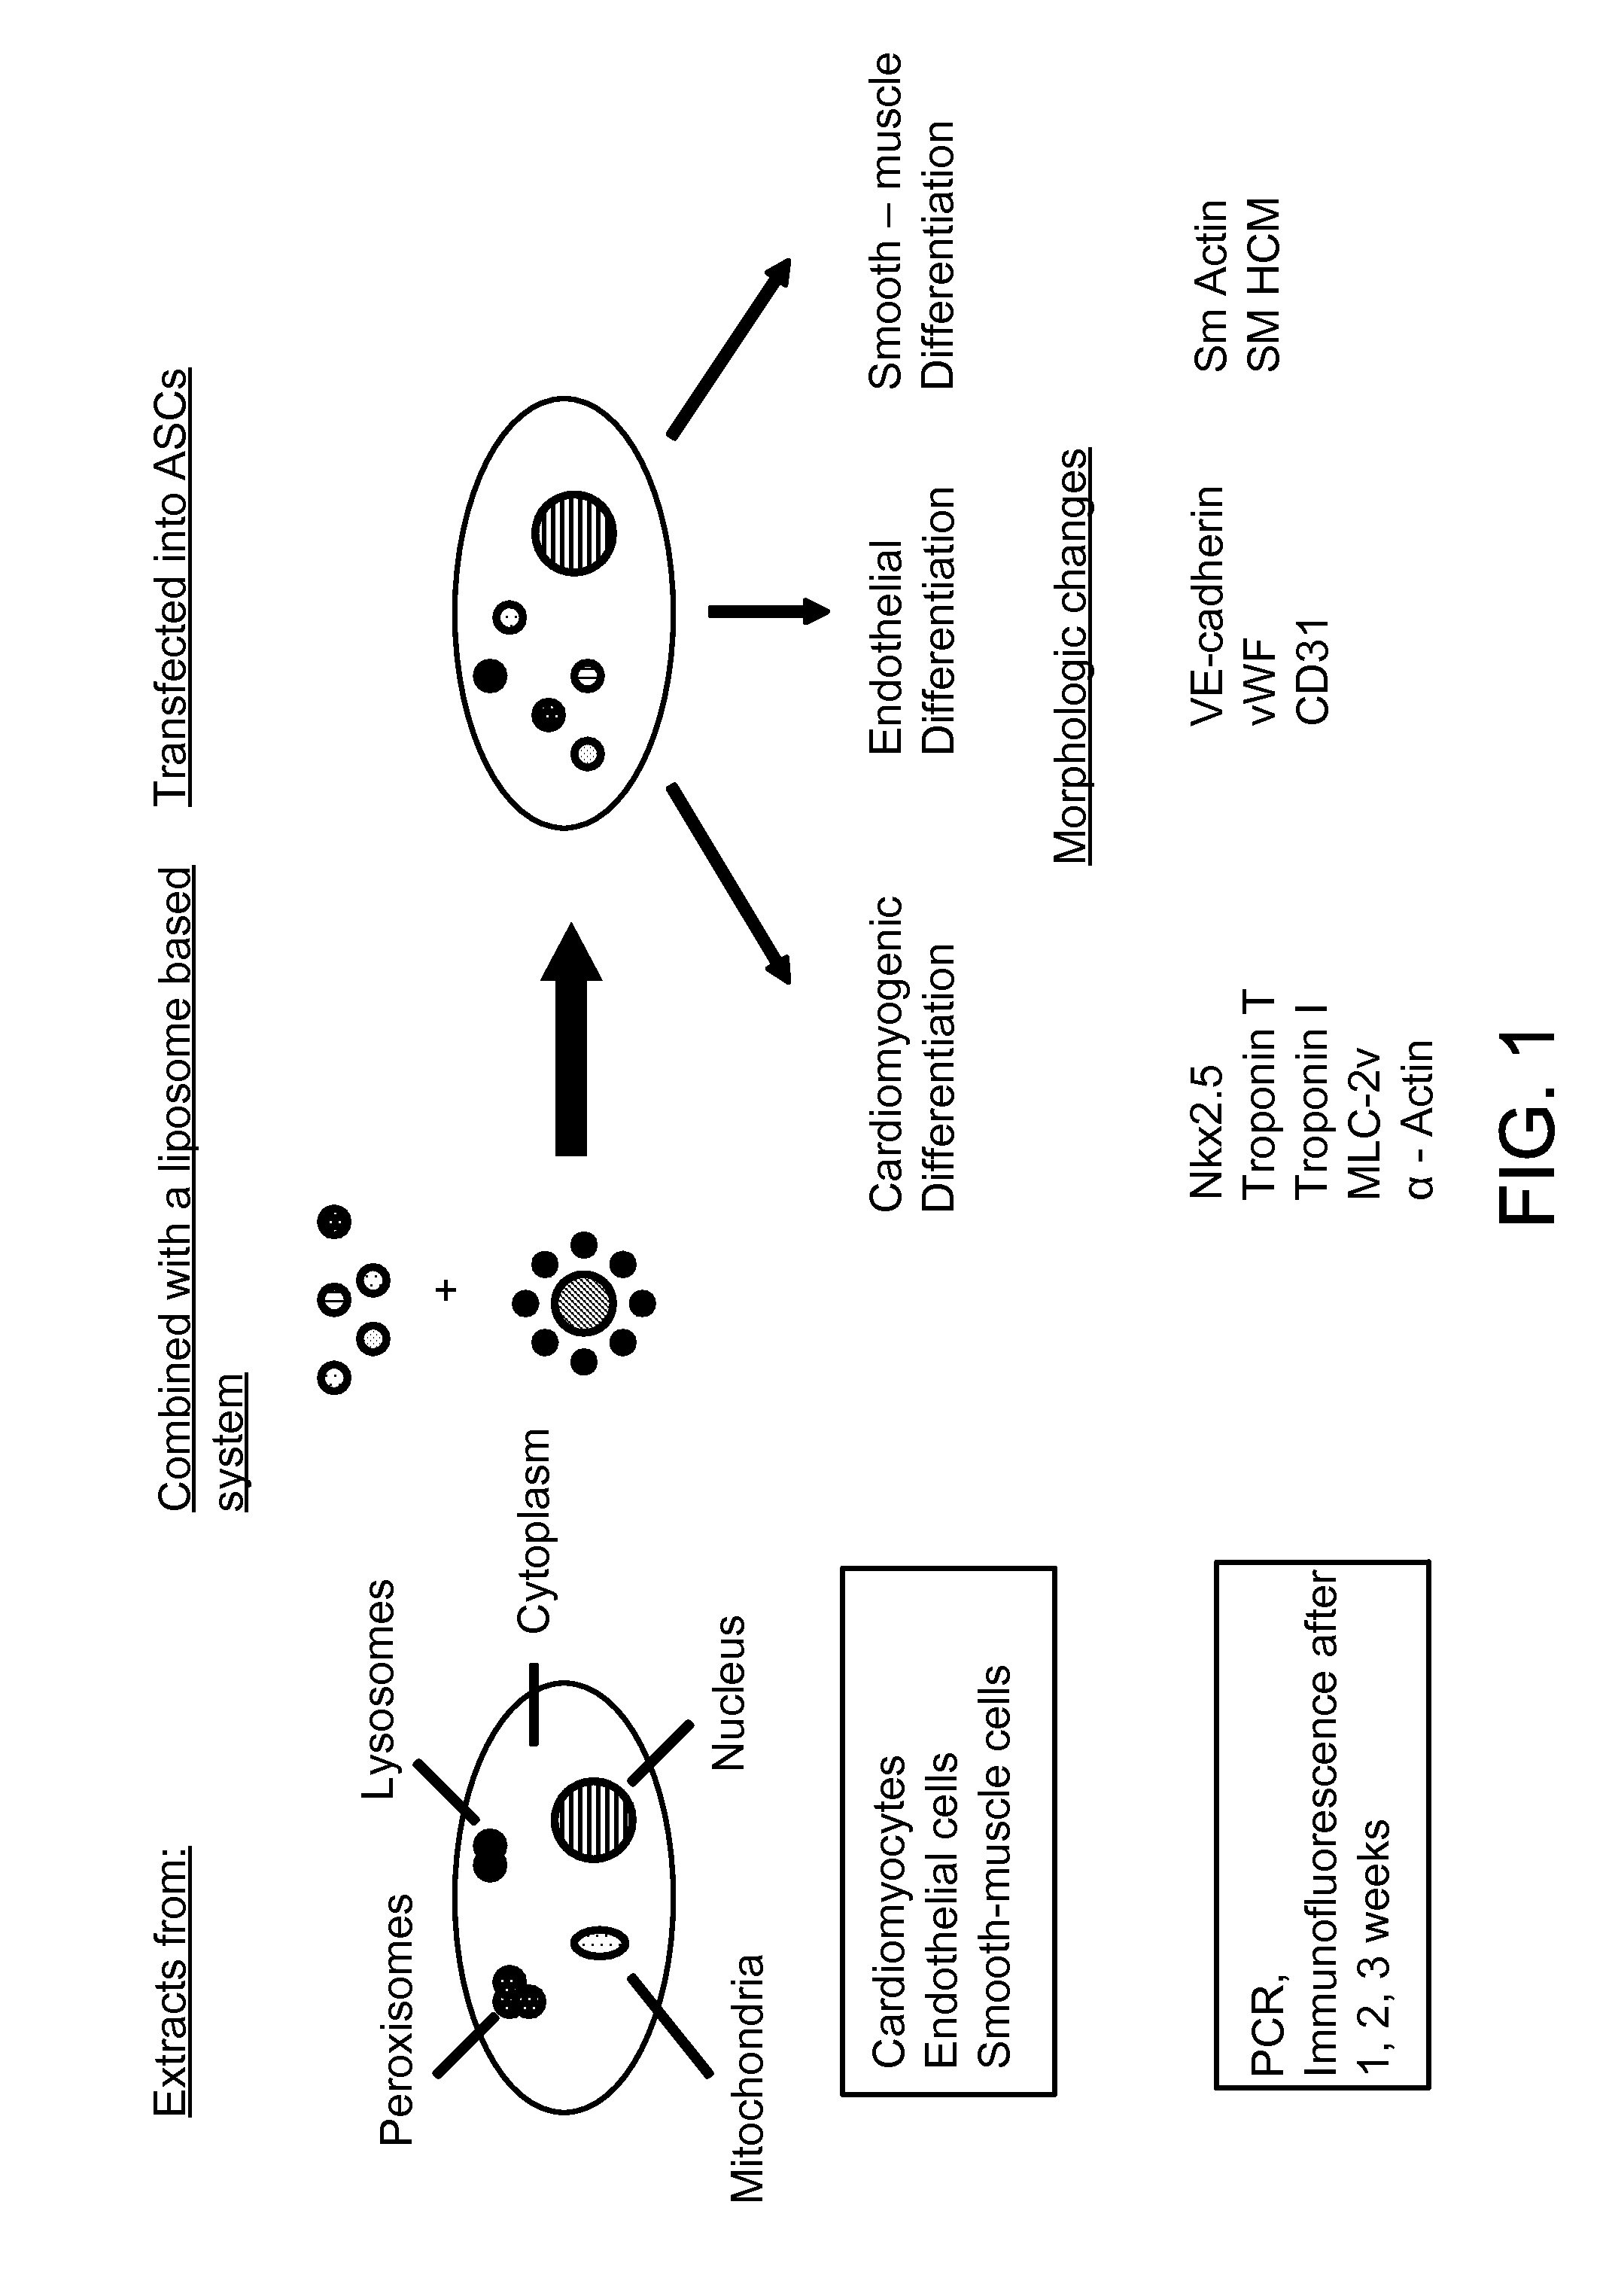 Liposome mediated delivery of lineage determining factors